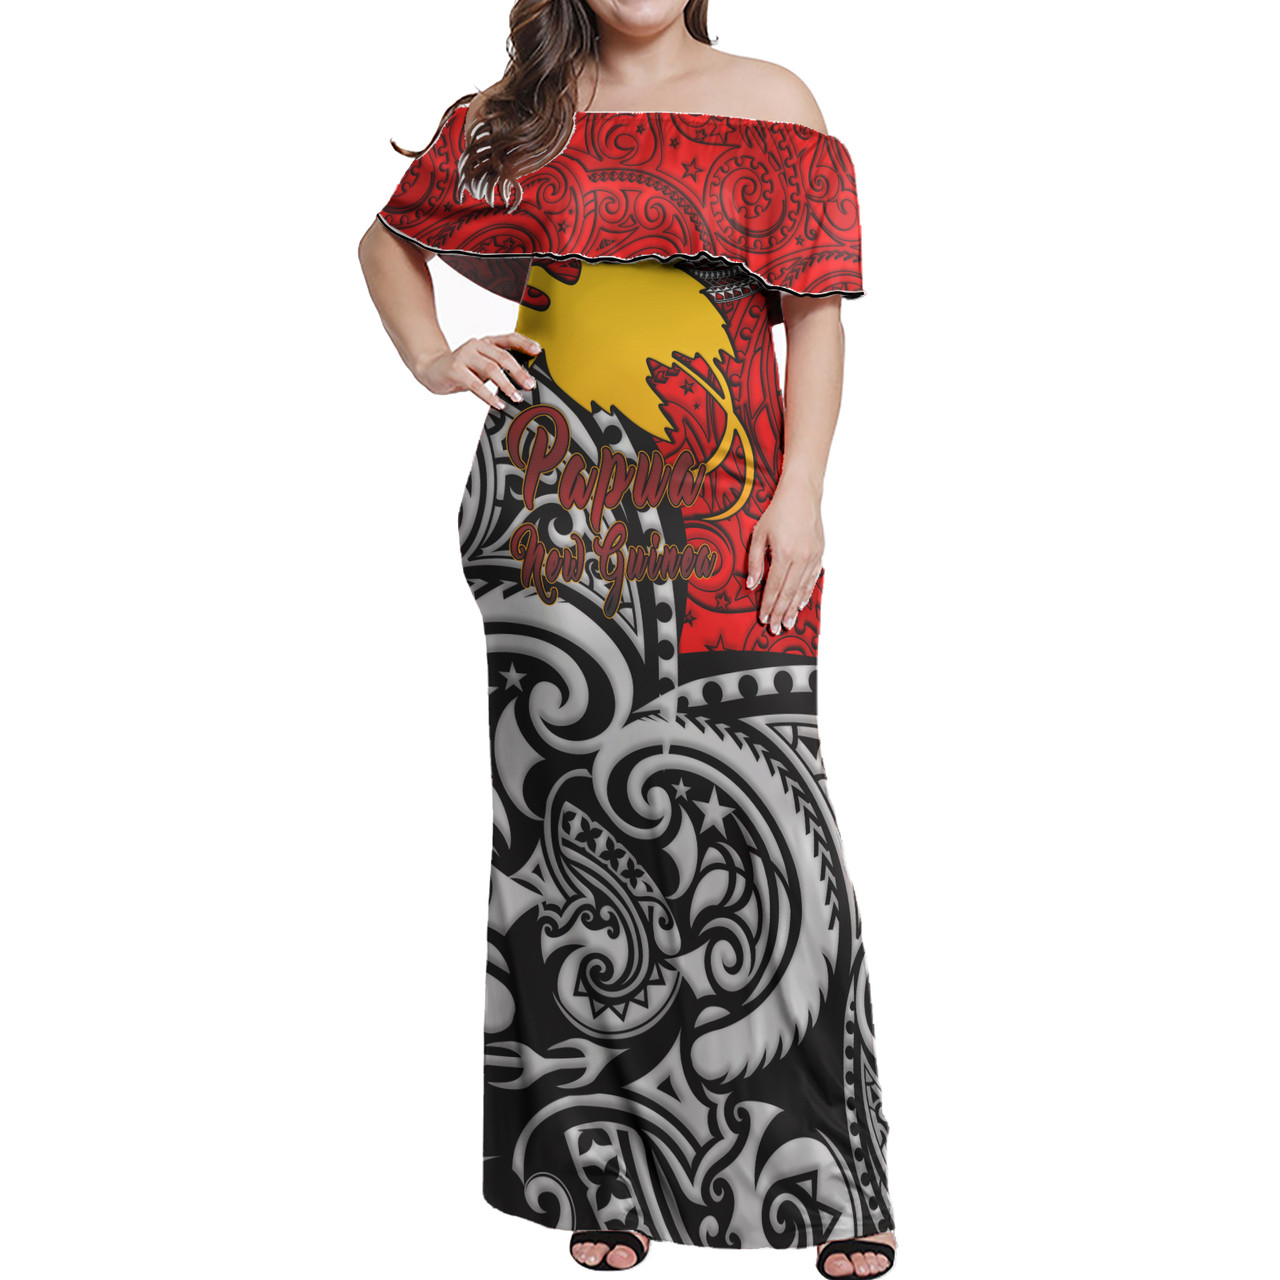 Papua New Guinea Woman Off Shoulder Long Dress - Emblem Of Papua New Guinea With Polynesian Patterns